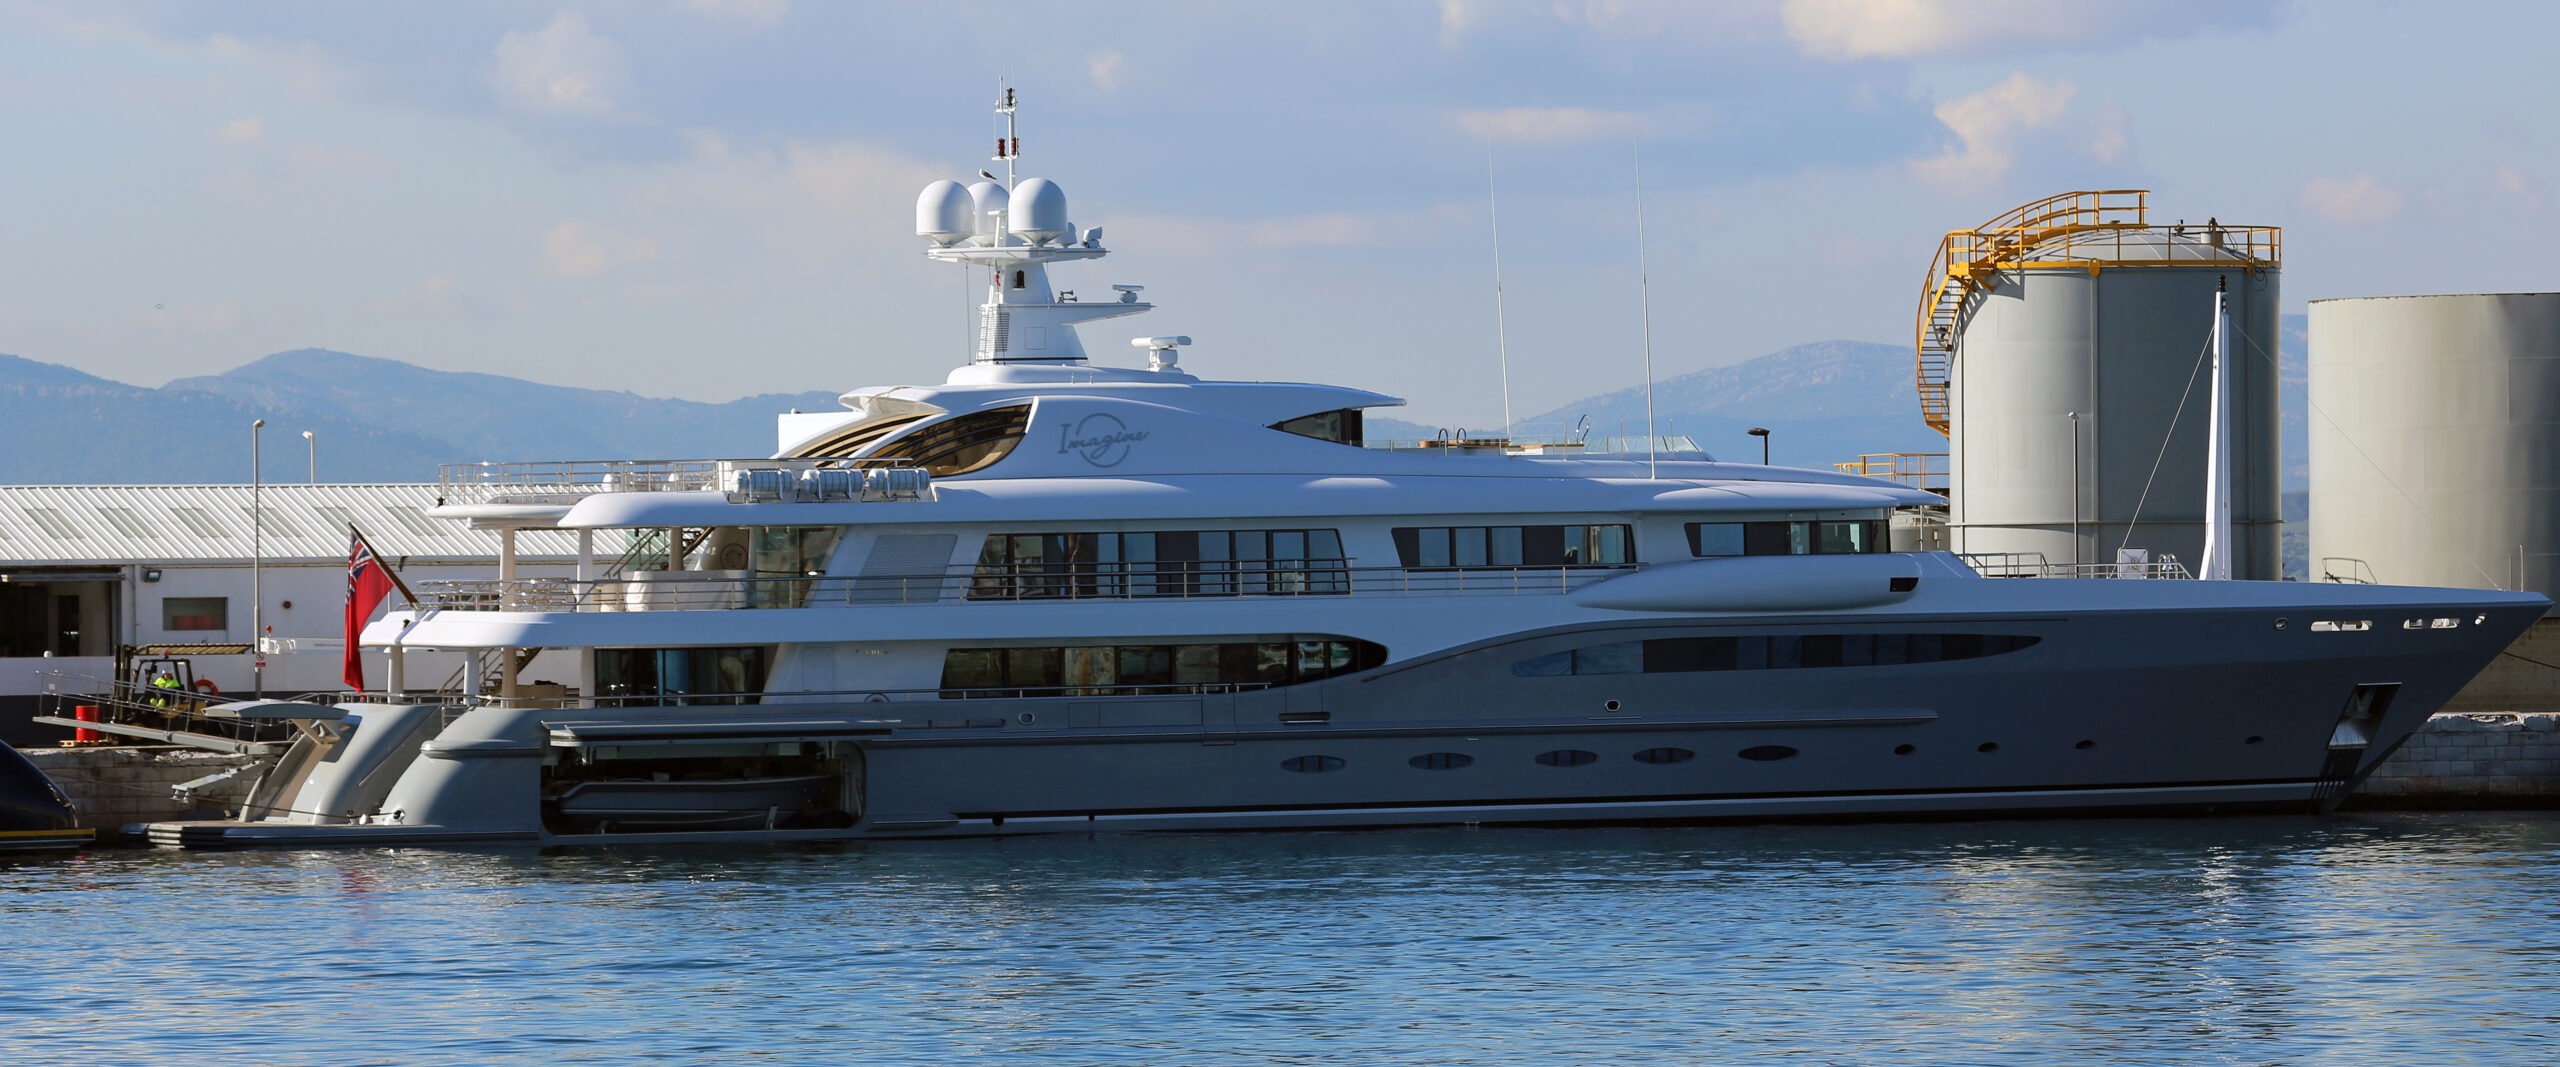 Are There Superyachts Available for Scientific Research